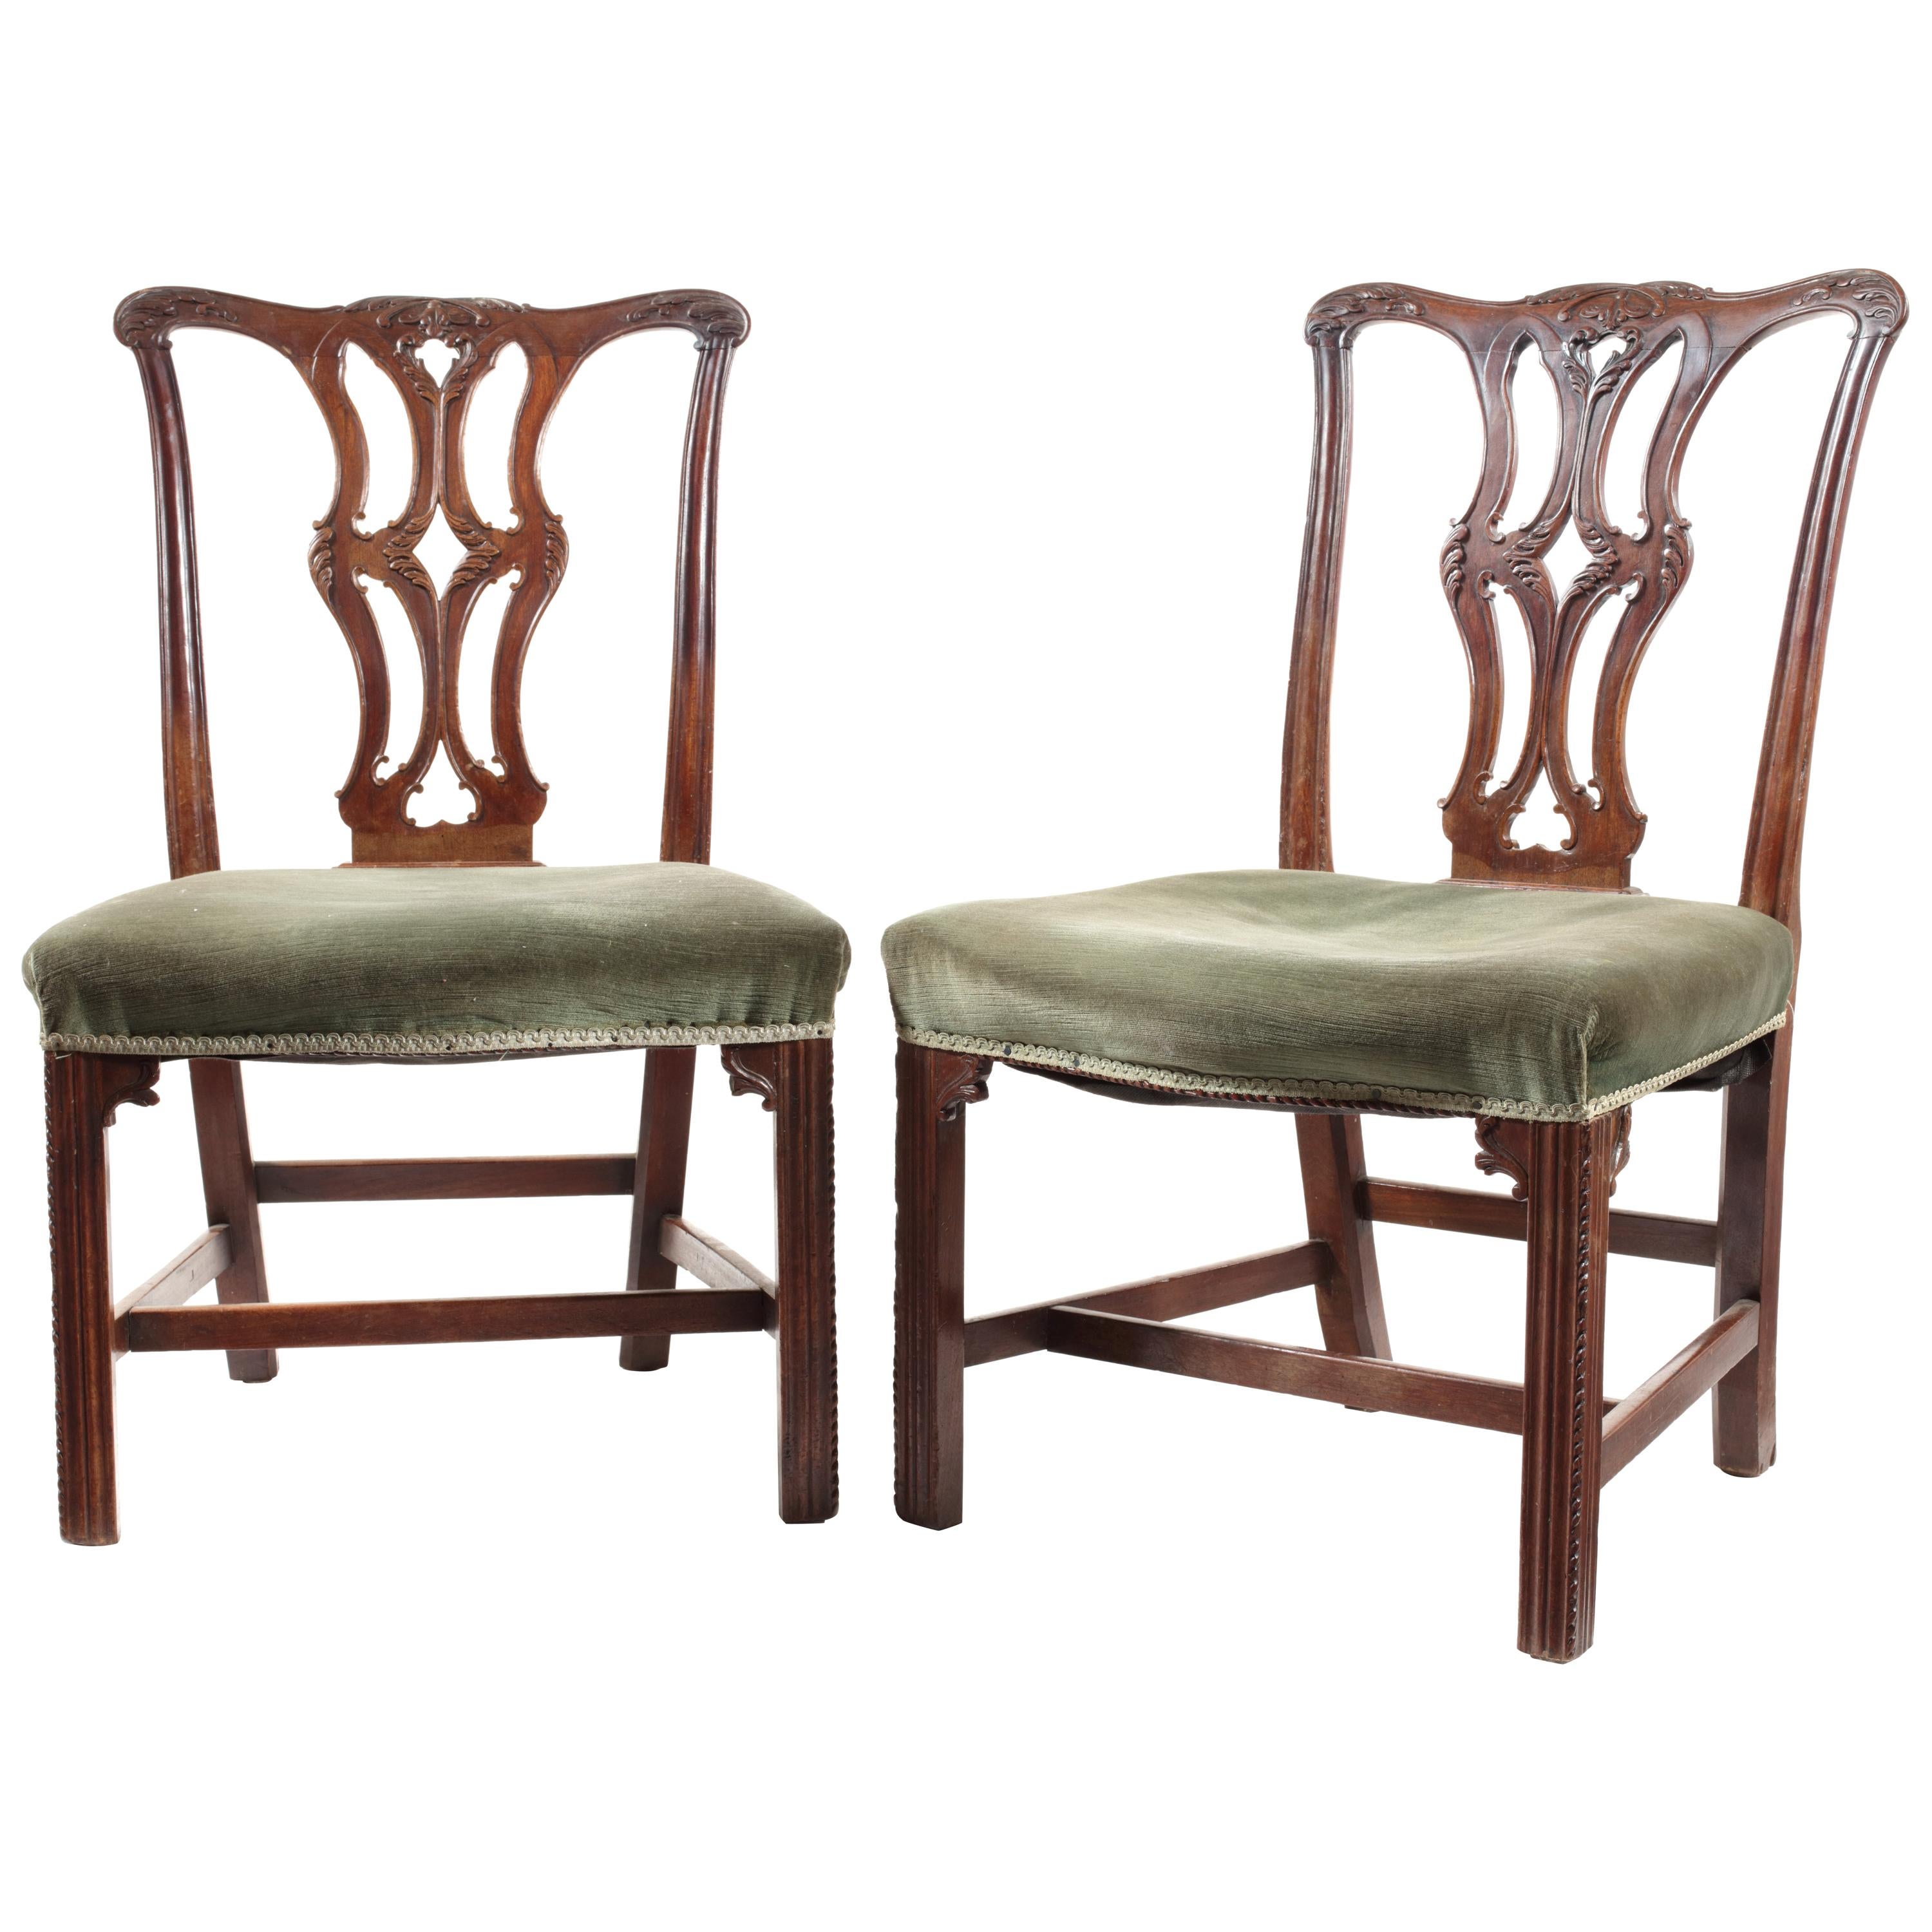 Pair of George III Carved Mahogany Dining Chairs in the Chippendale Gothic Taste